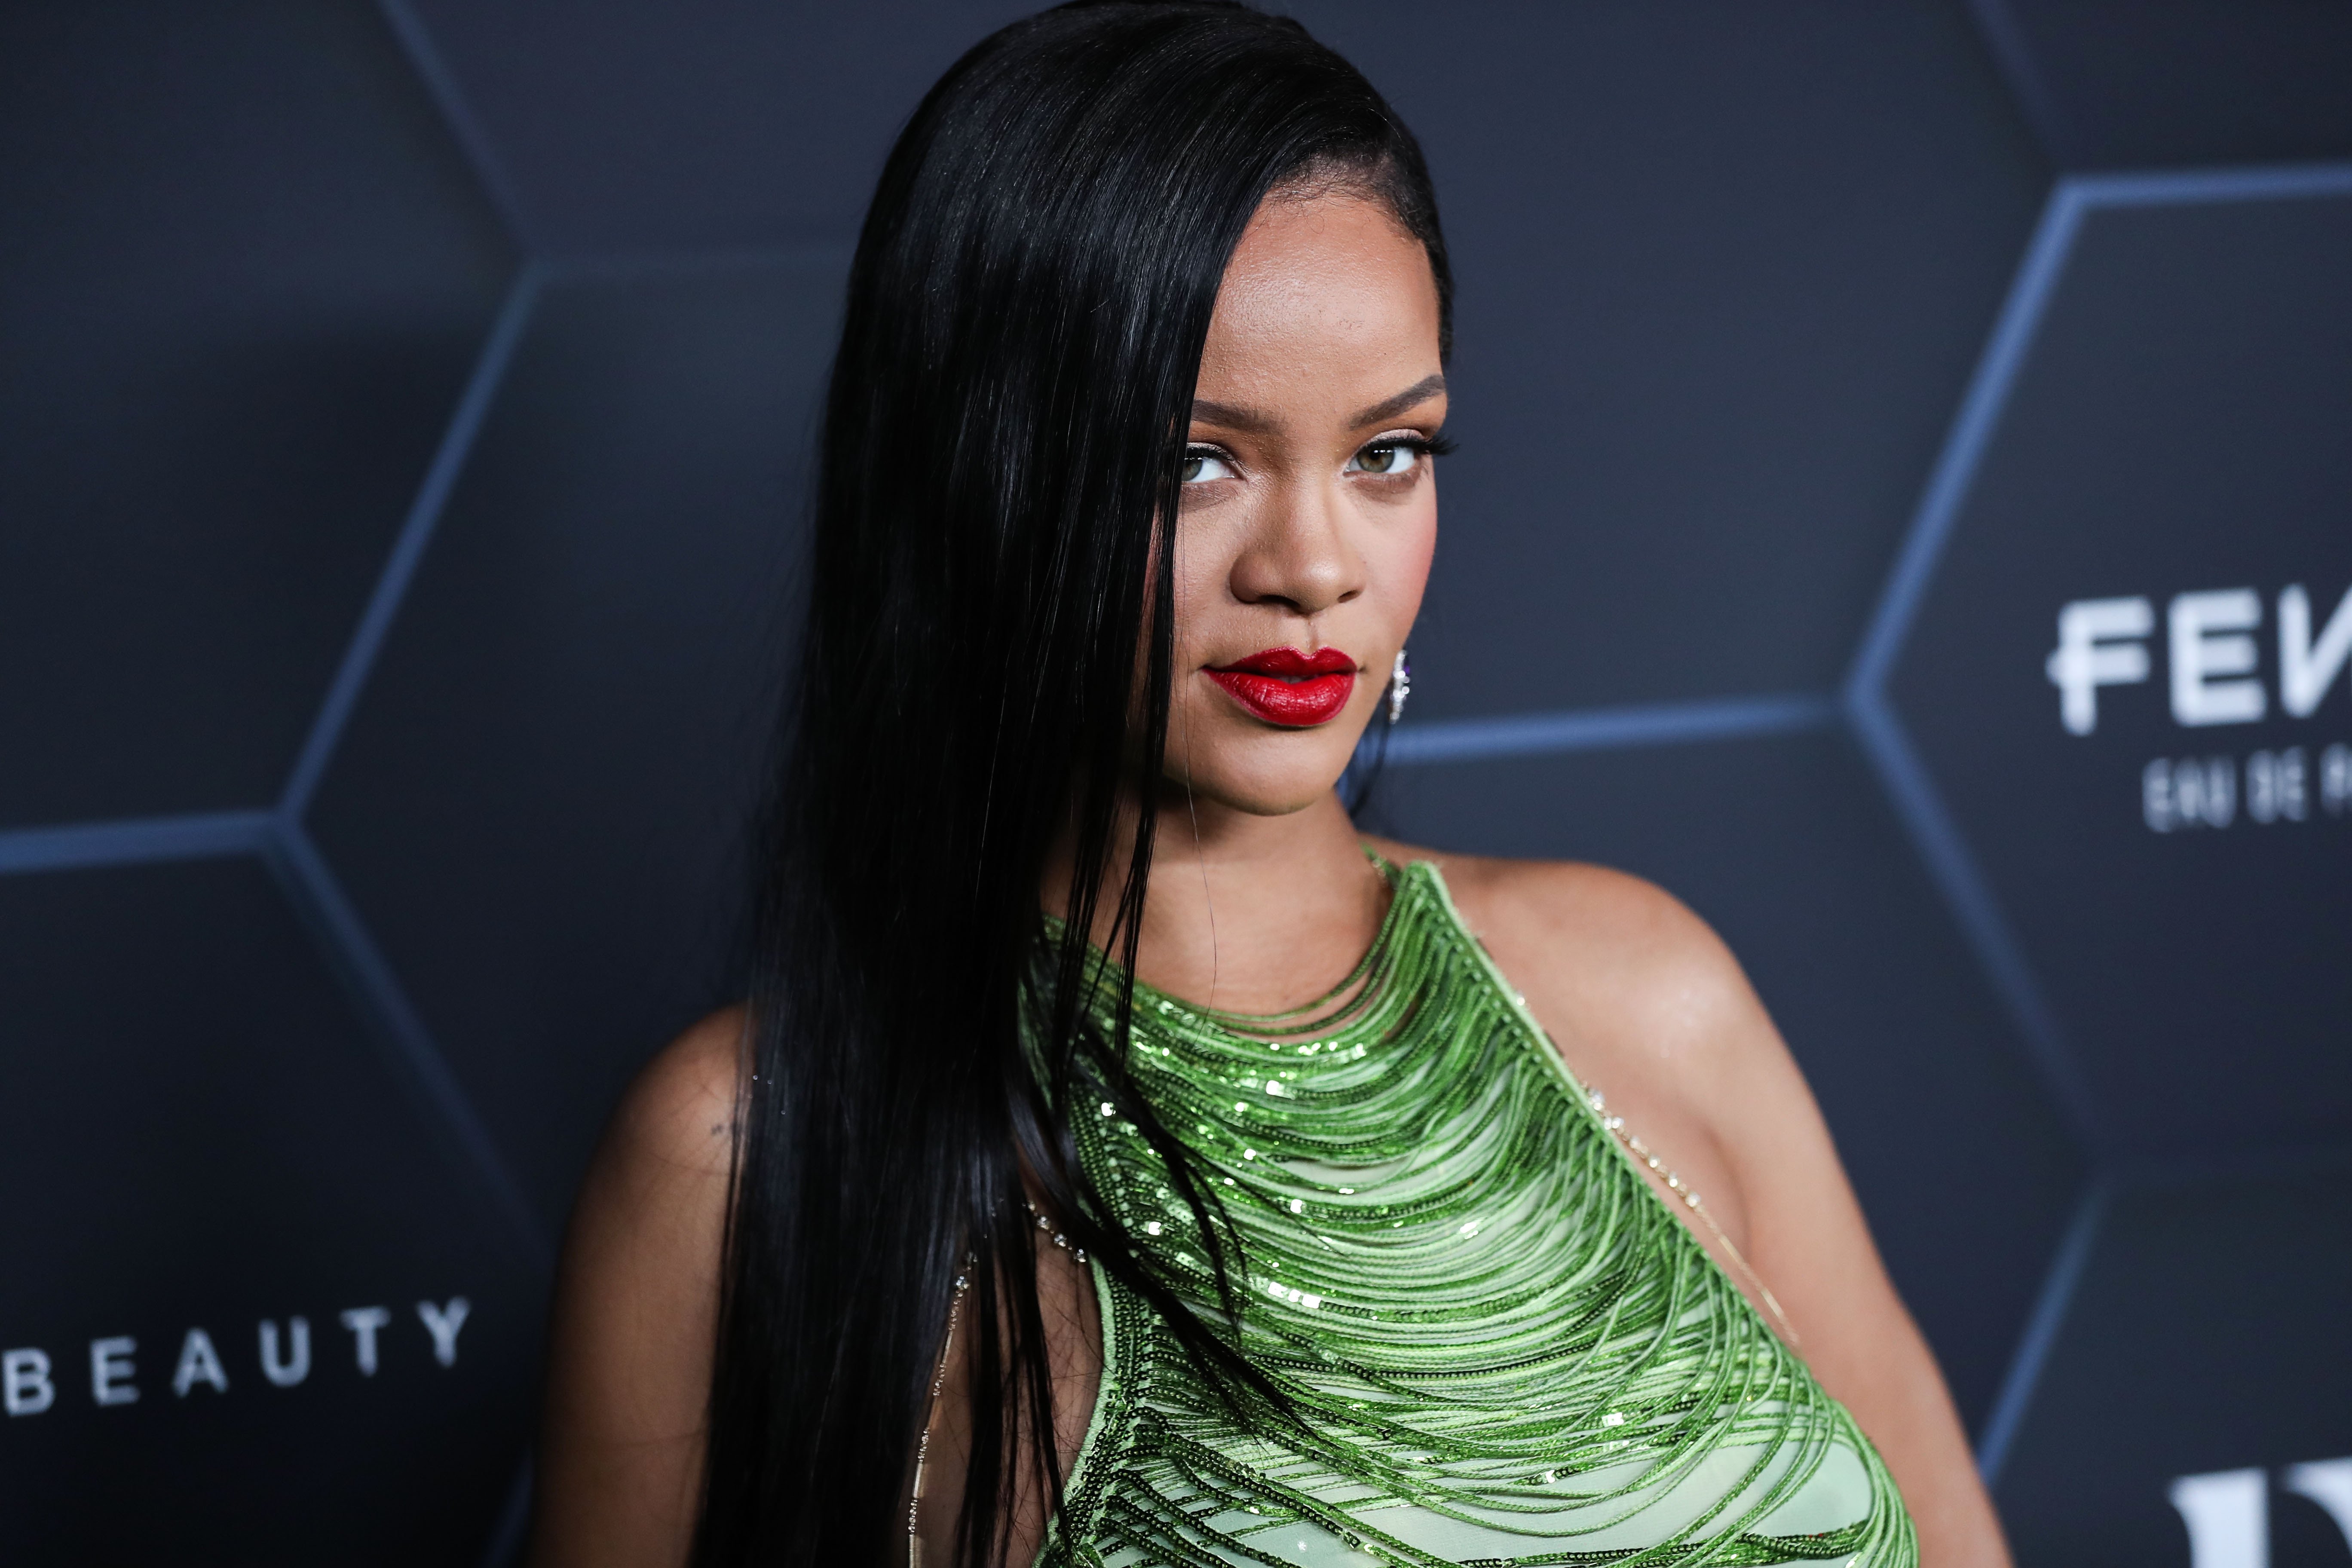 Here's How a Fashion Student's Design Ended Up on Rihanna - Racked